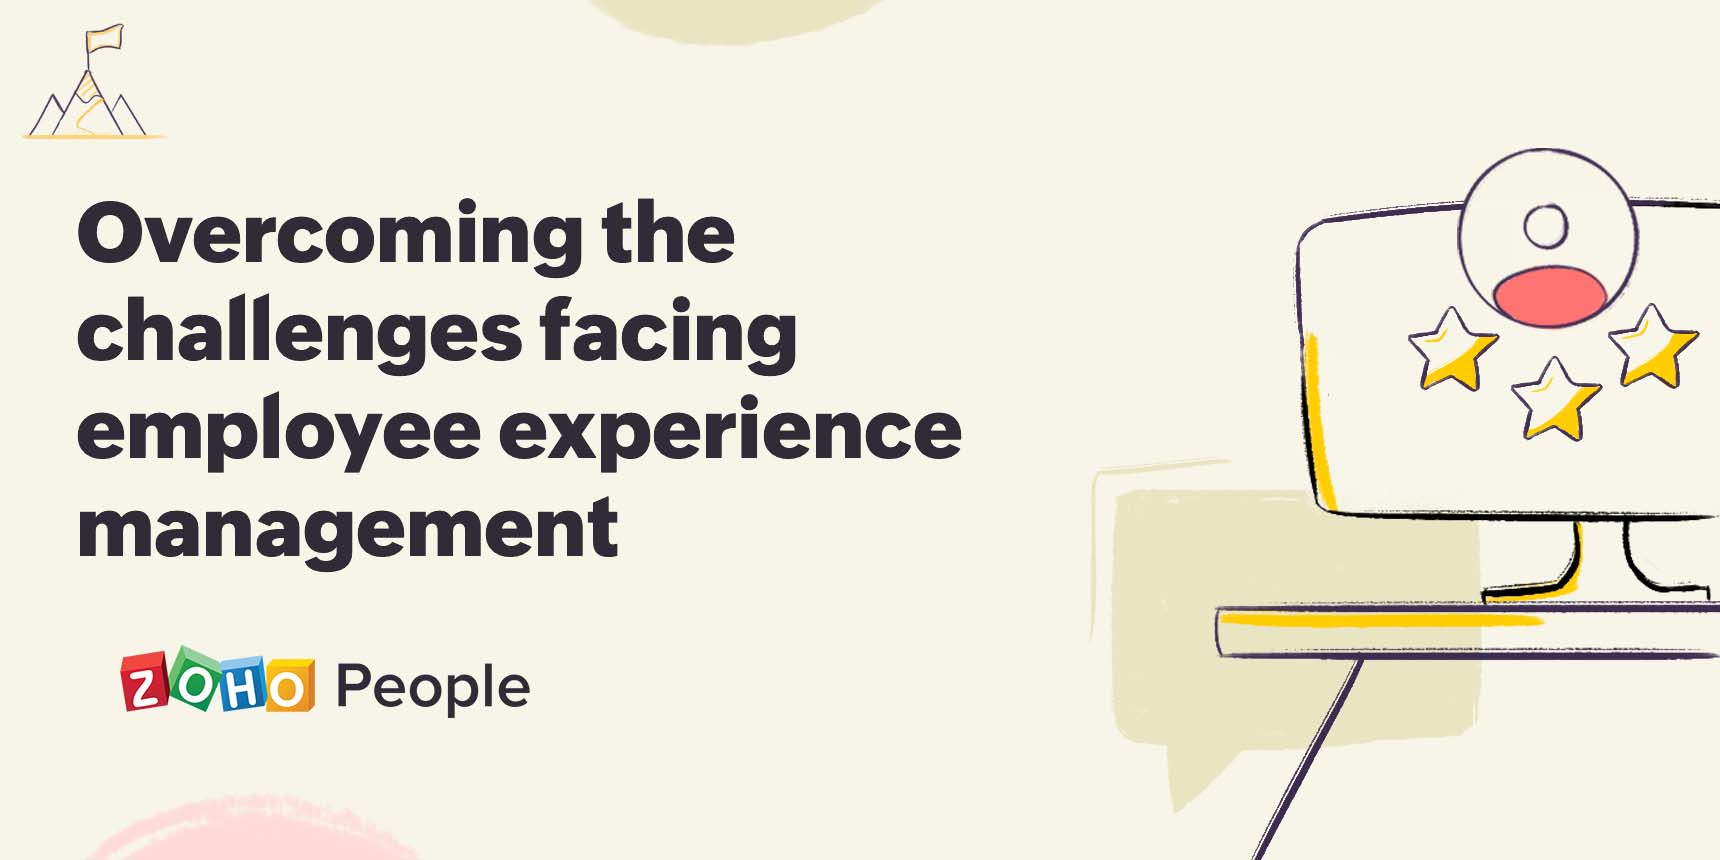 Overcoming employee experience challenges